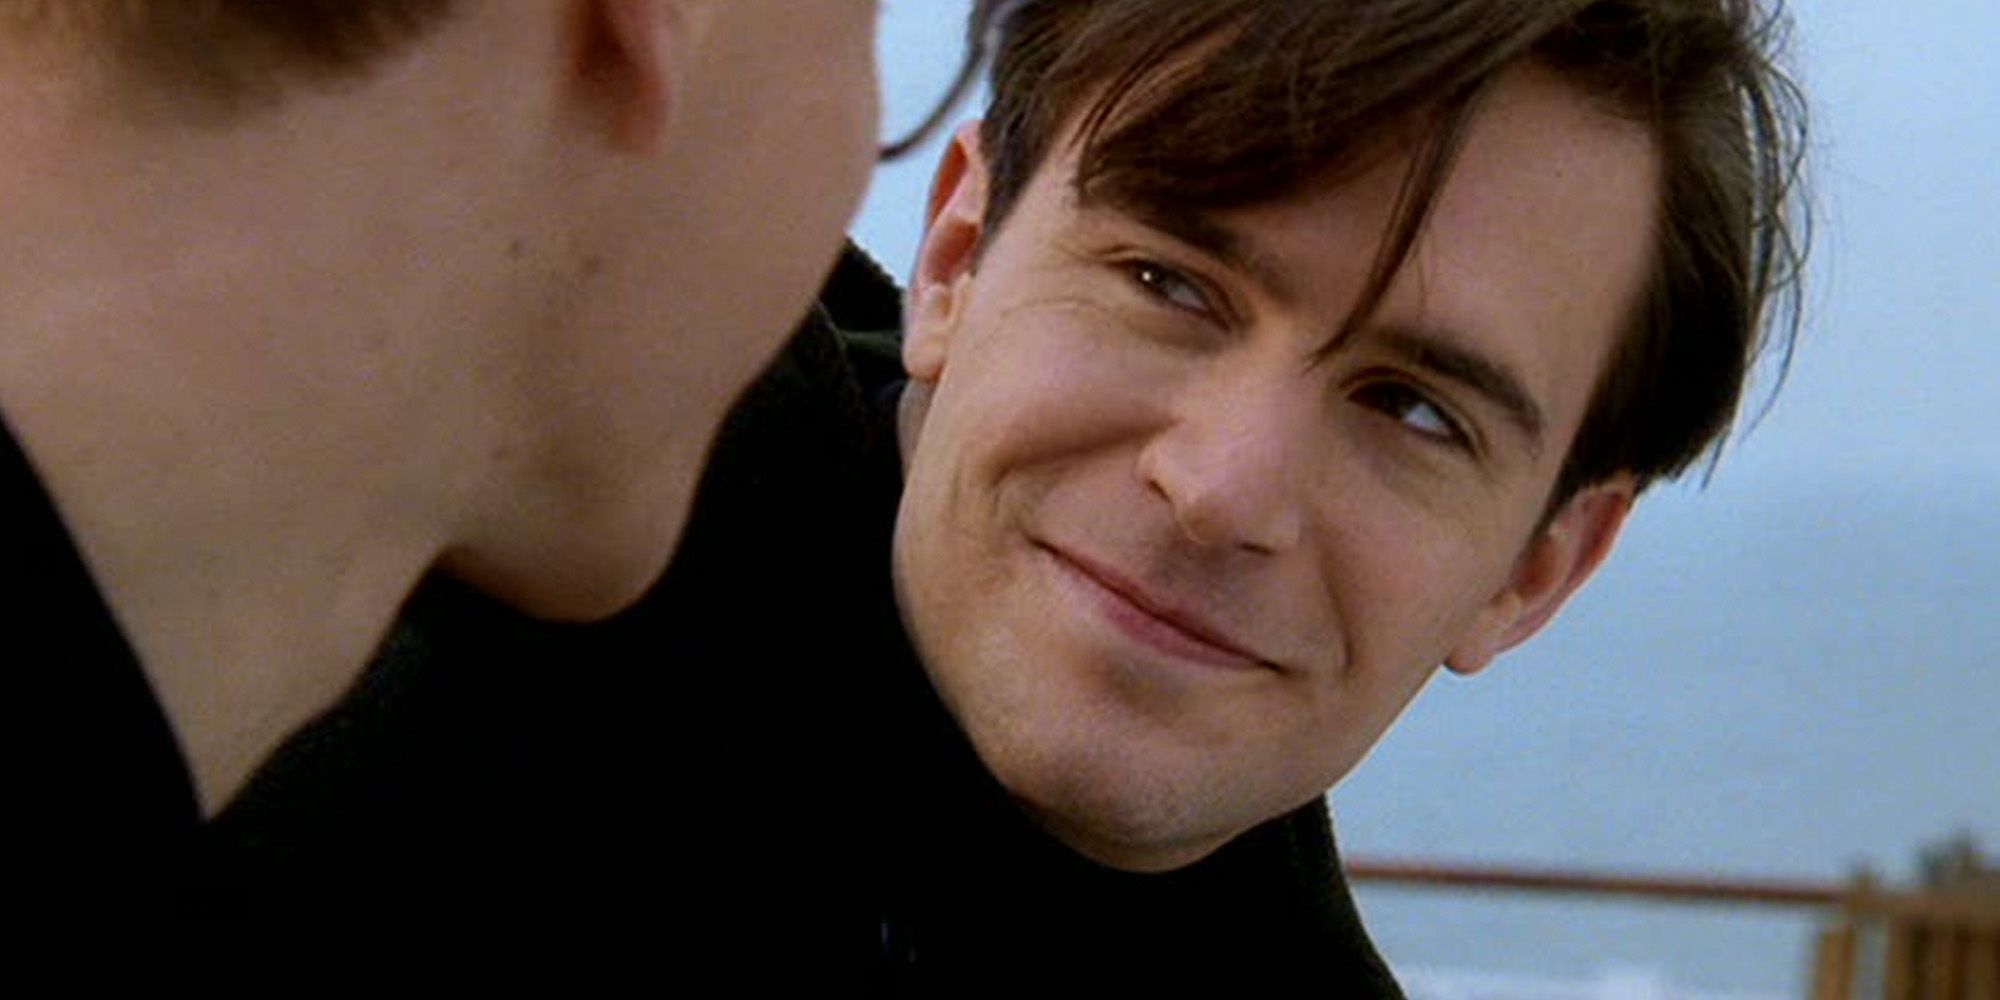 Jack Davenport as Peter Smith-Kingsley in The Talented Mr. Ripley